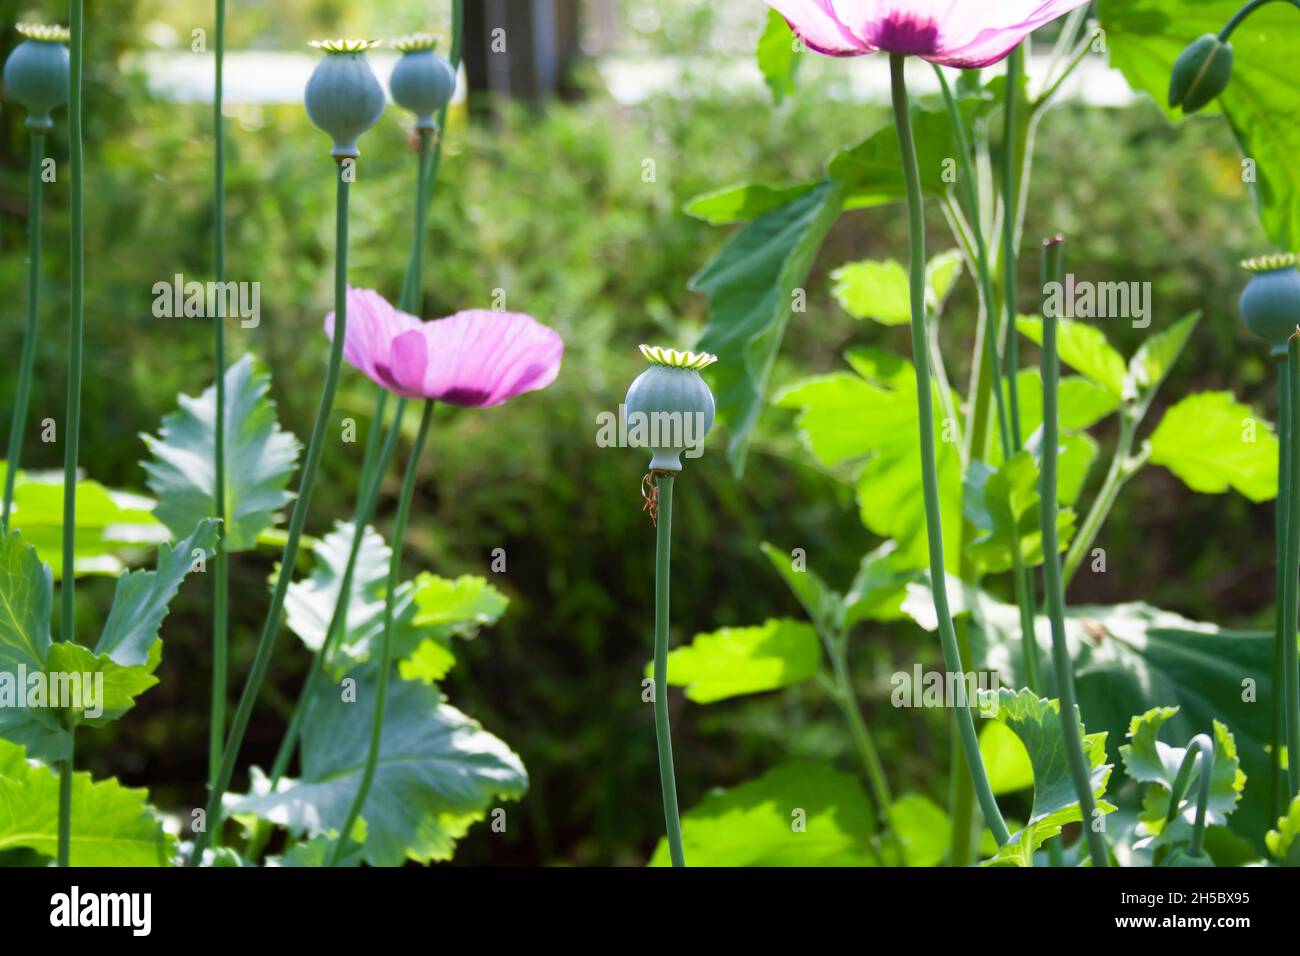 Poppy pods and flowers growing in a garden Stock Photo